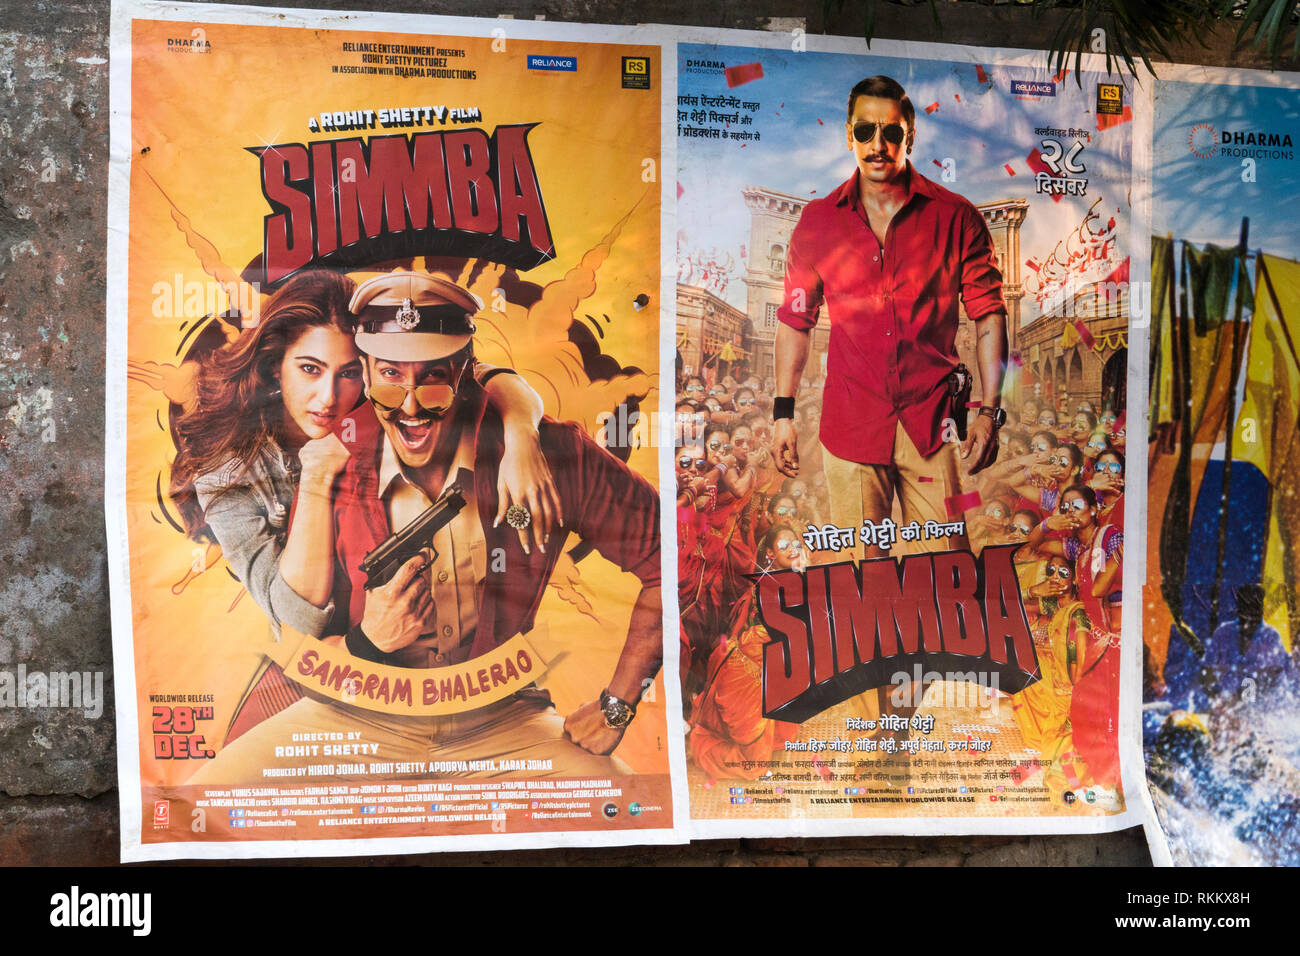 Bollywood movie posters on wall in Amritsar, Punjab, India Stock Photo